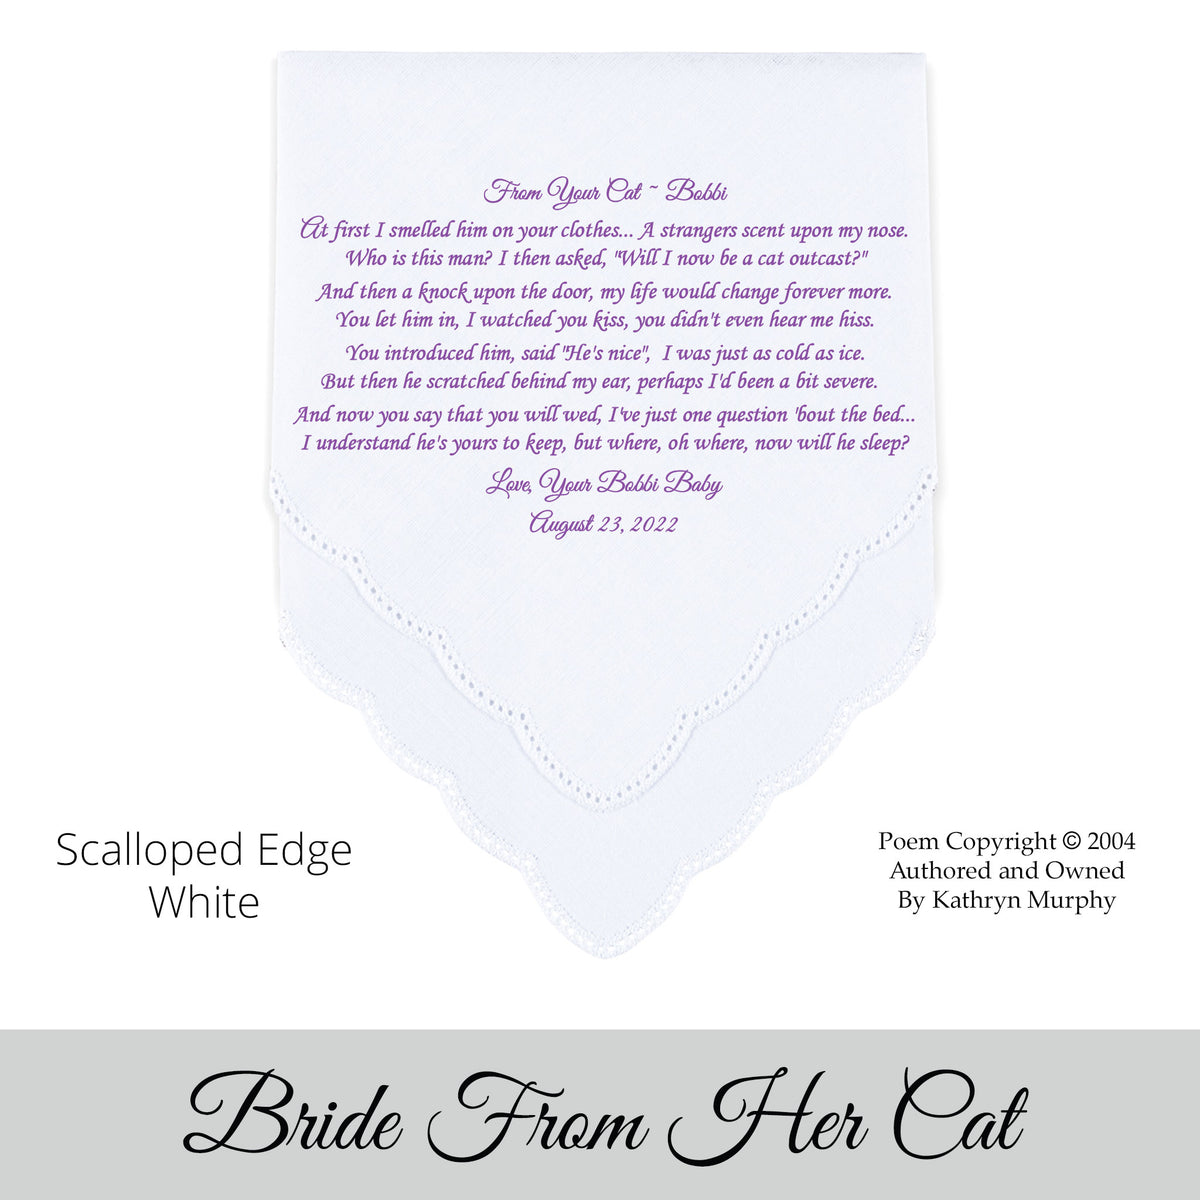 Gift for the Bride wedding hankie with the poem from her cat